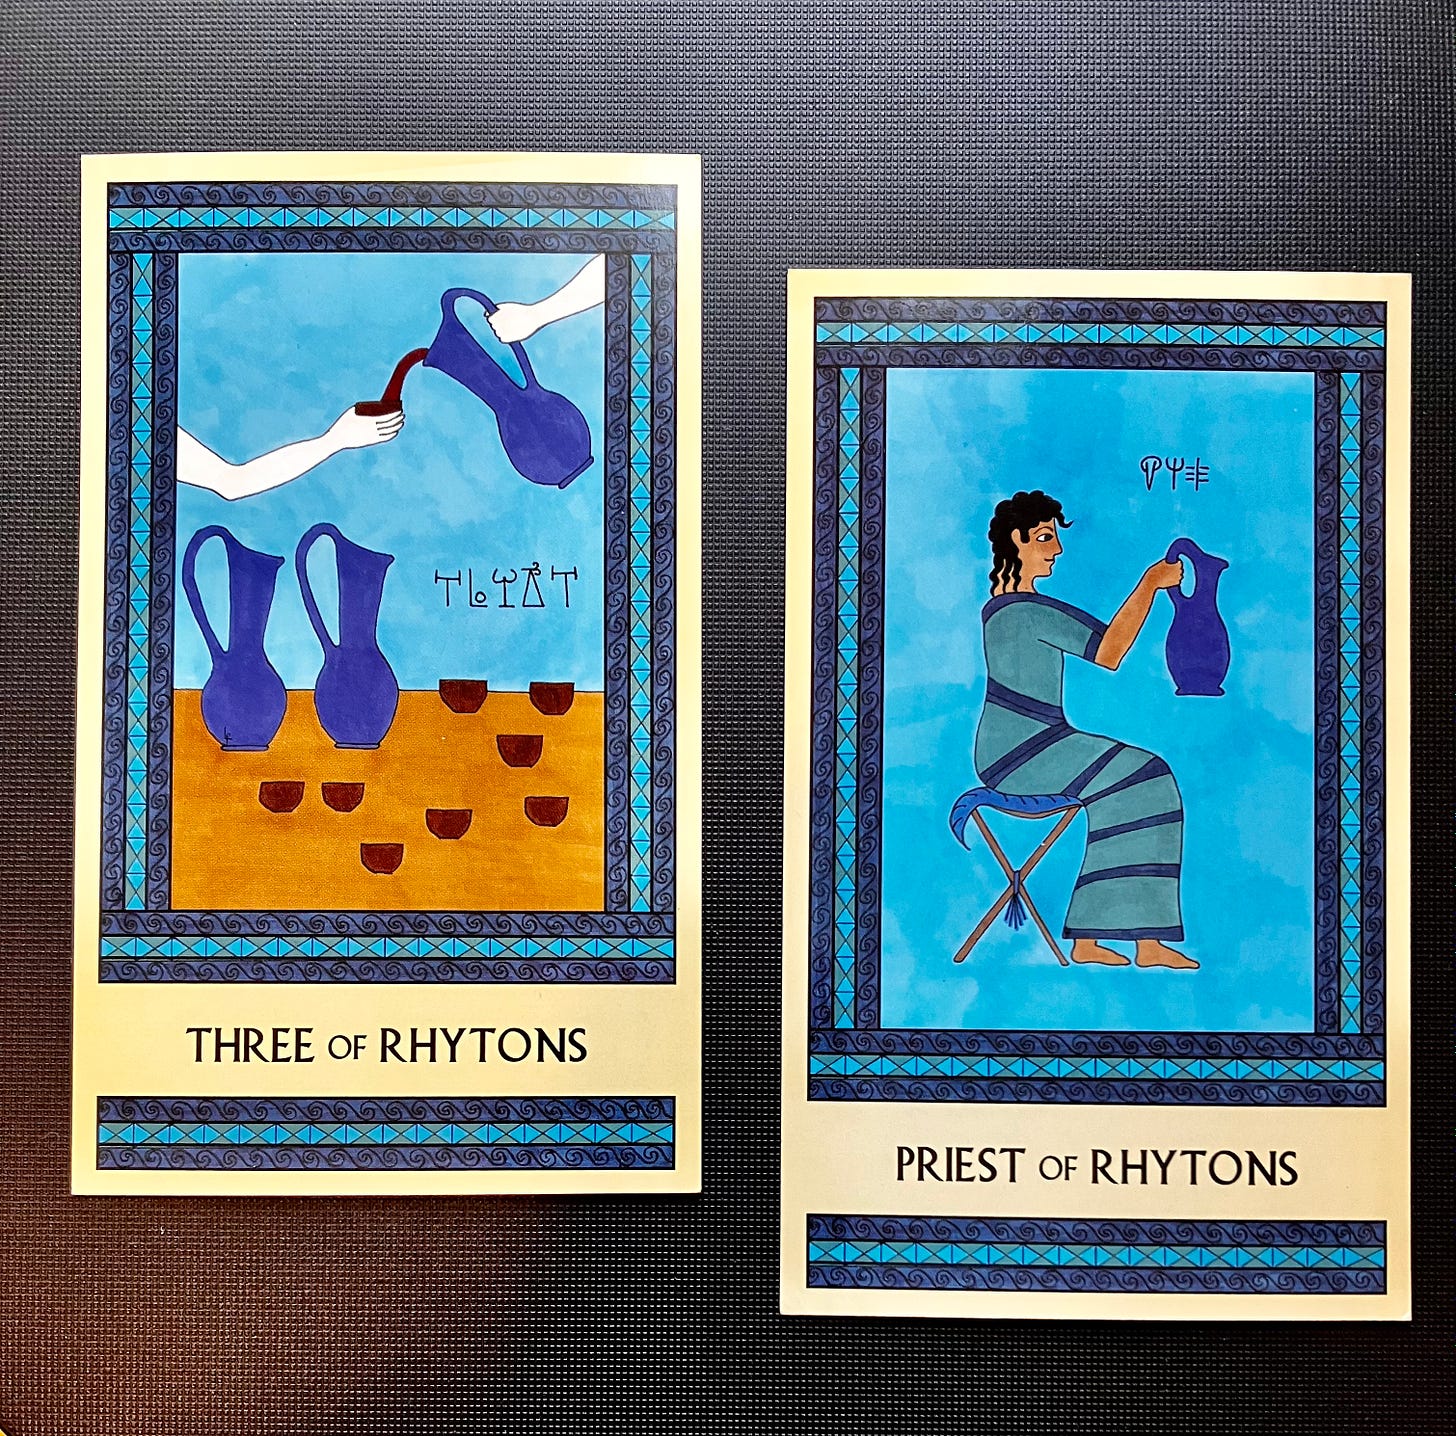 Two Minoan Tarot cards side by side on a black surface. Both cards are in shades of blue. The Three of Rhytons shows a hand holding a pitcher that is pouring wine into another's cup. There are more pitchers and cups on the table. The Priest of Rhytons shows a Minoan man in long robes, seated, facing right and holding up a large blue pitcher.